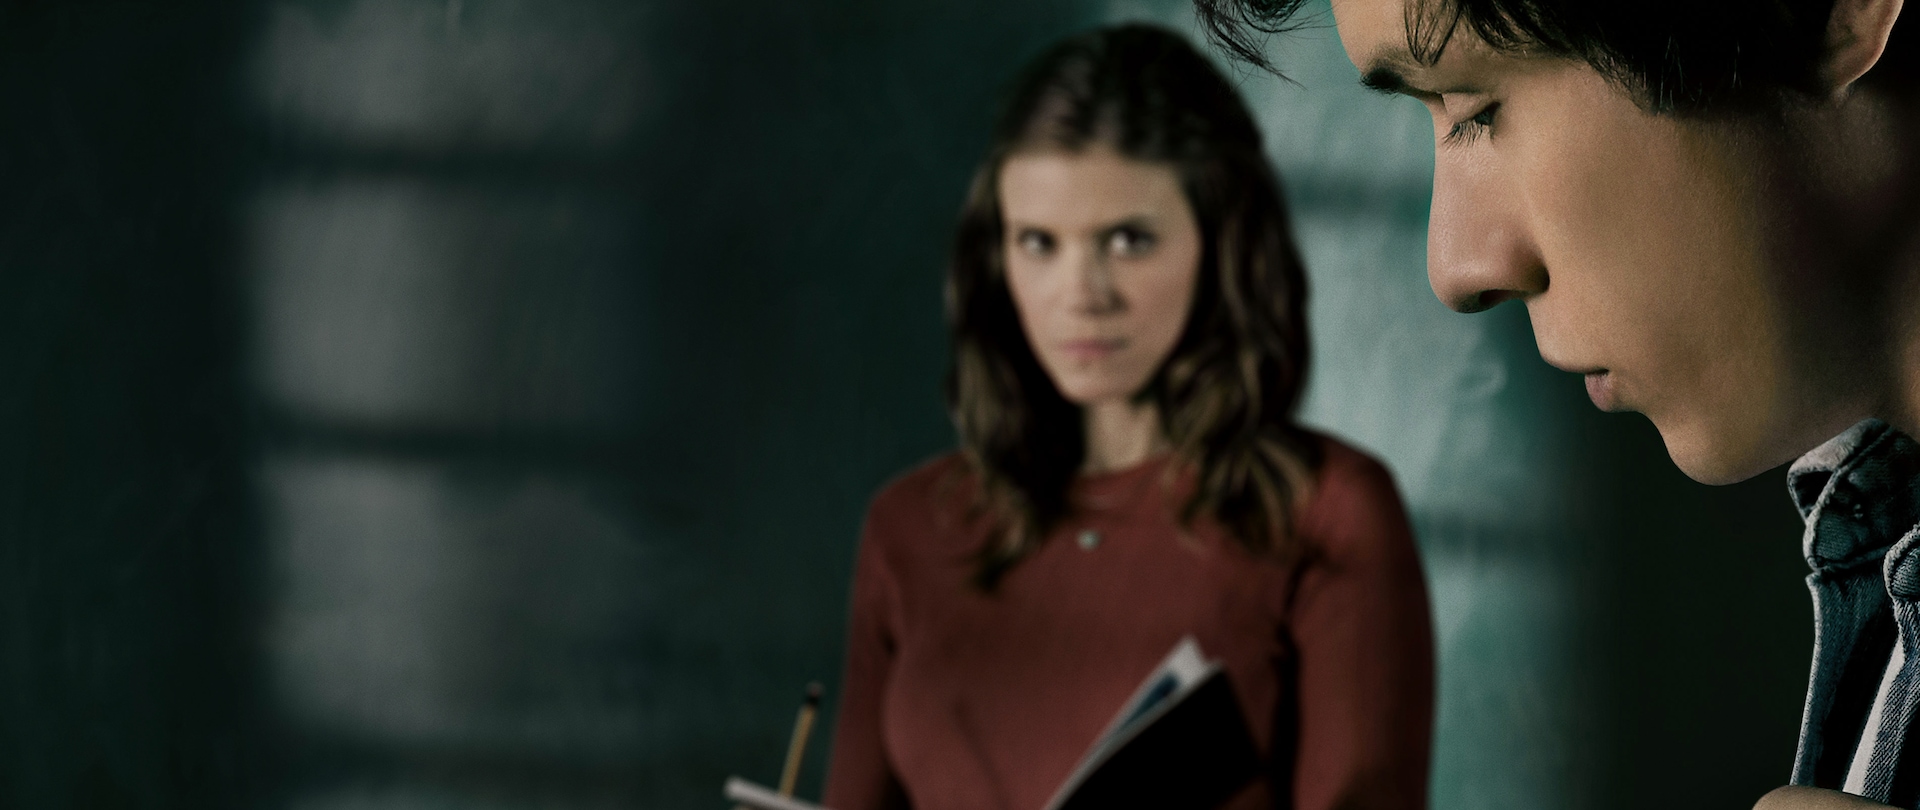 Blurred Kate Mara holding textbook in background standing in classroom with close up of young man's face for FX's A Teacher